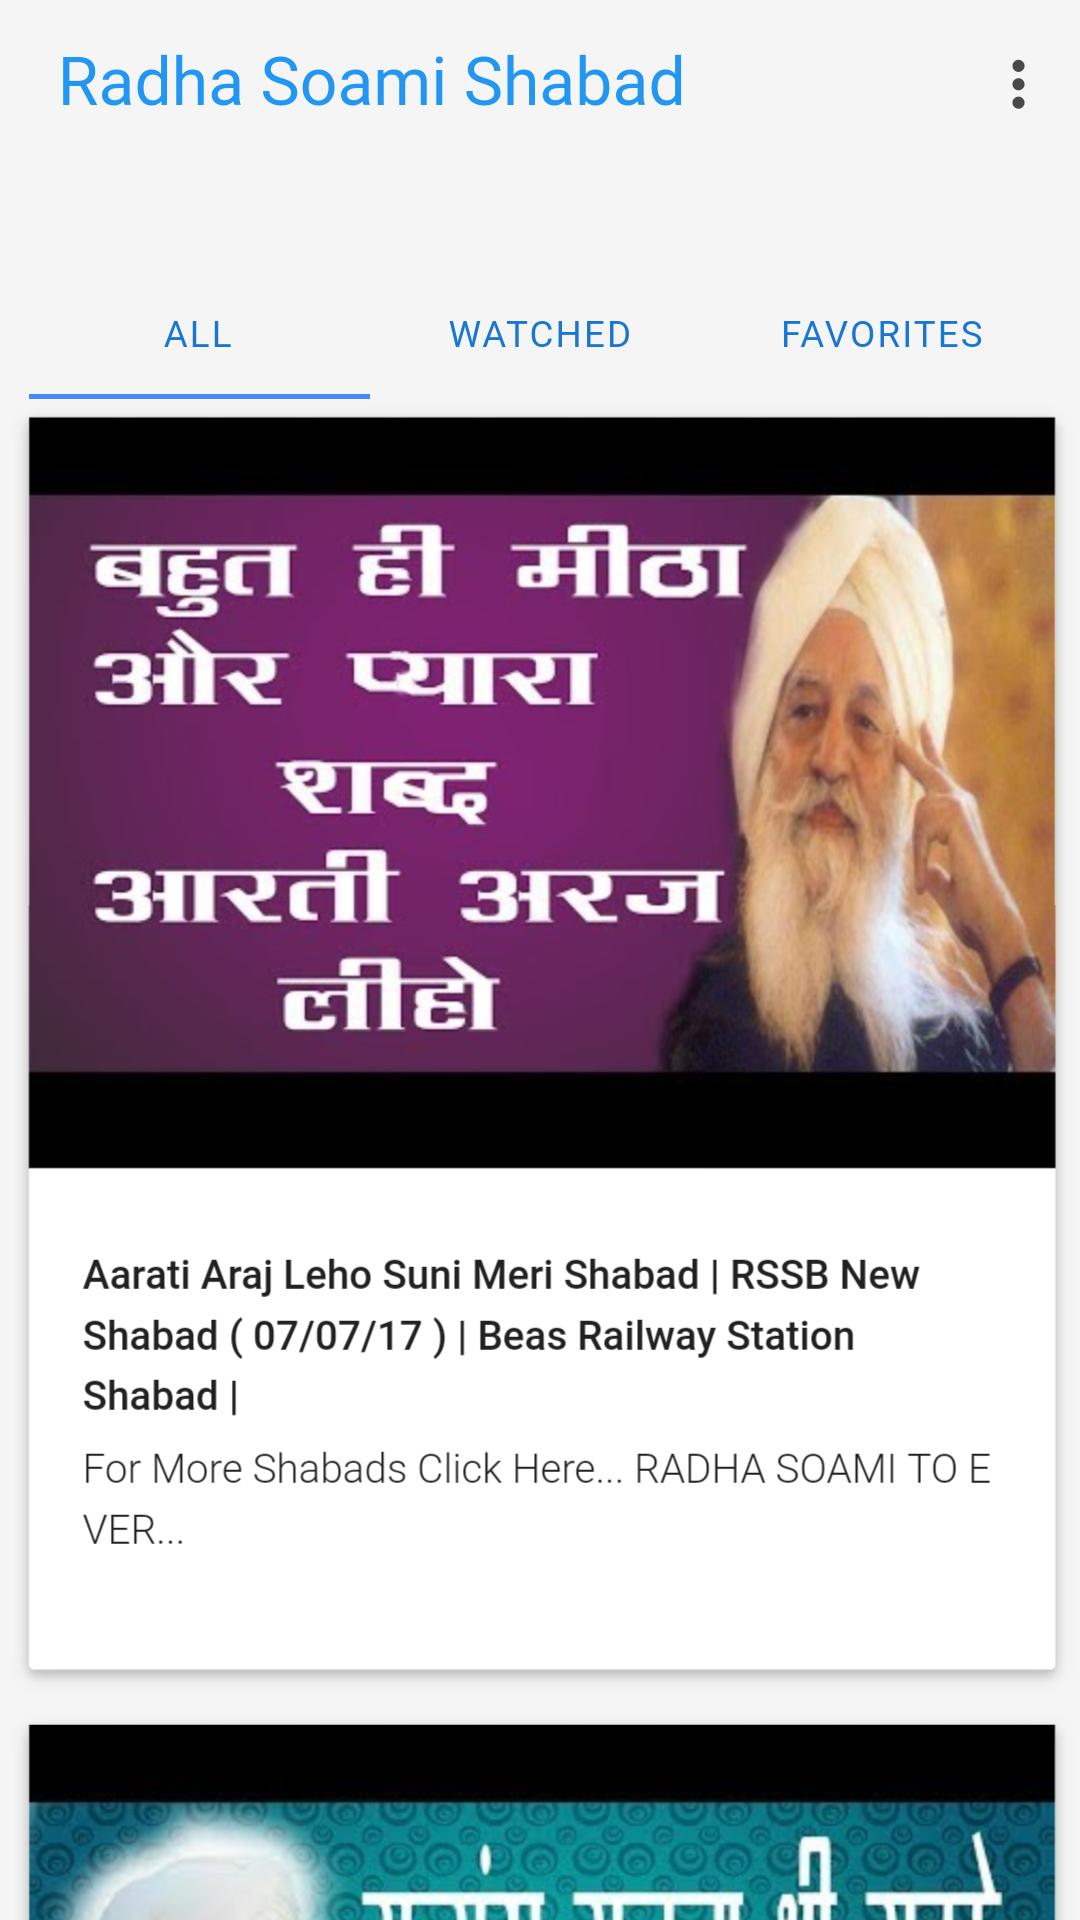 Radha Soami Shabad for Android - APK Download